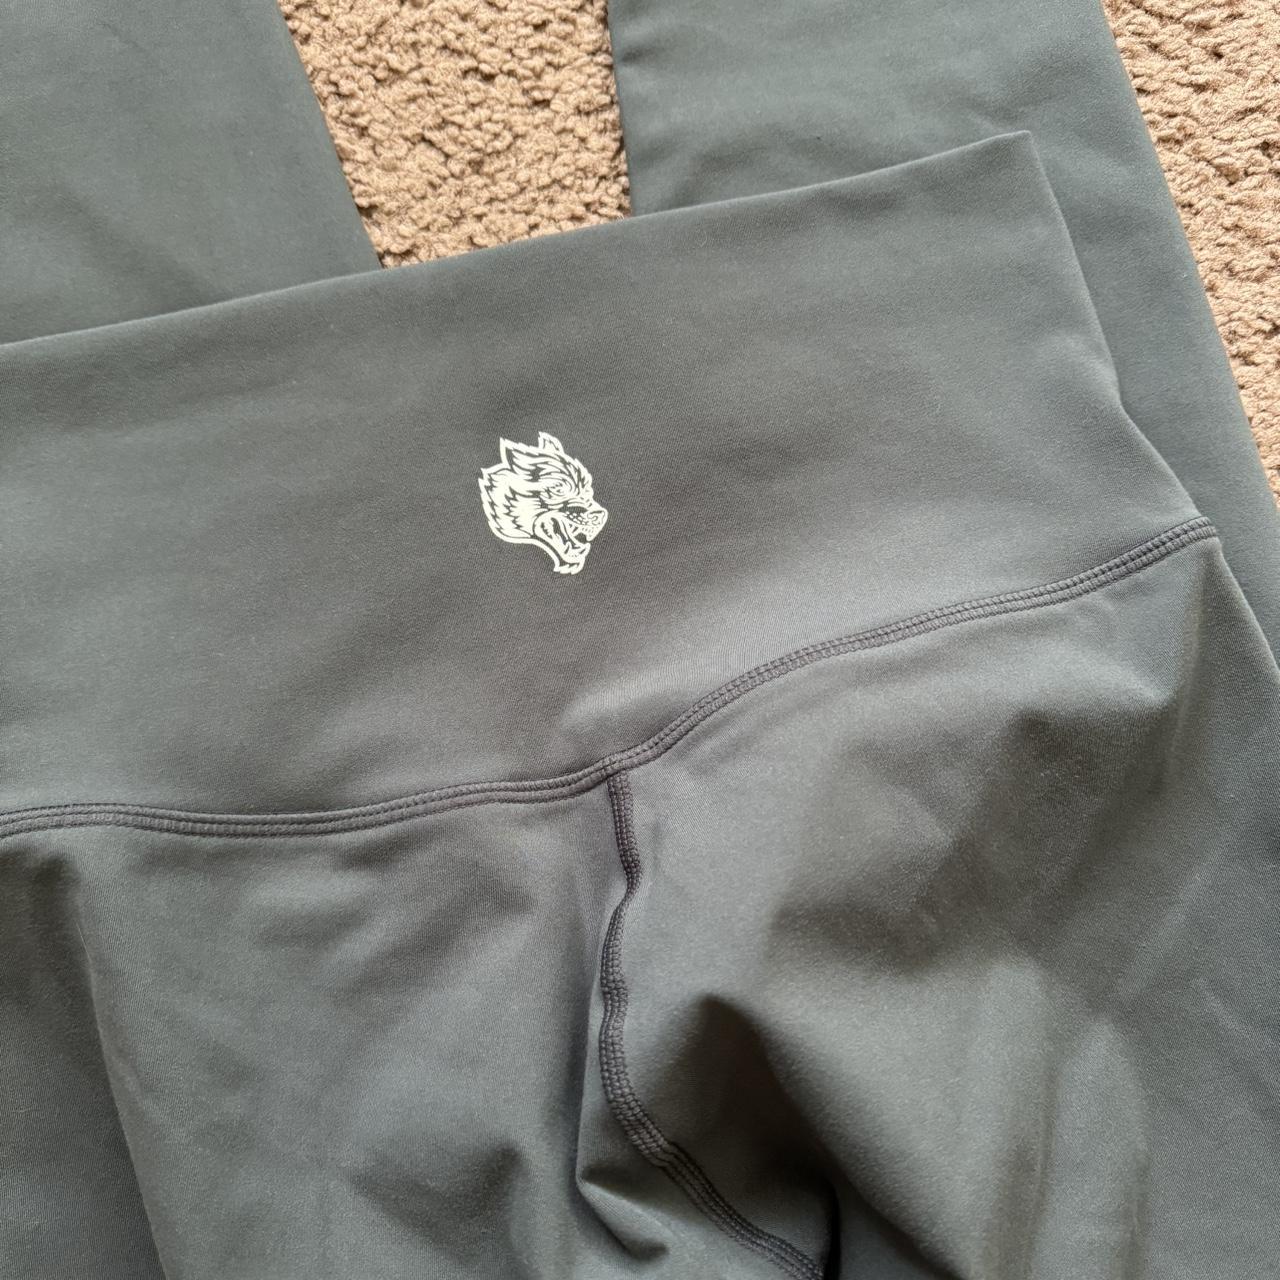 Size small Darc Sport leggings, reselling because - Depop